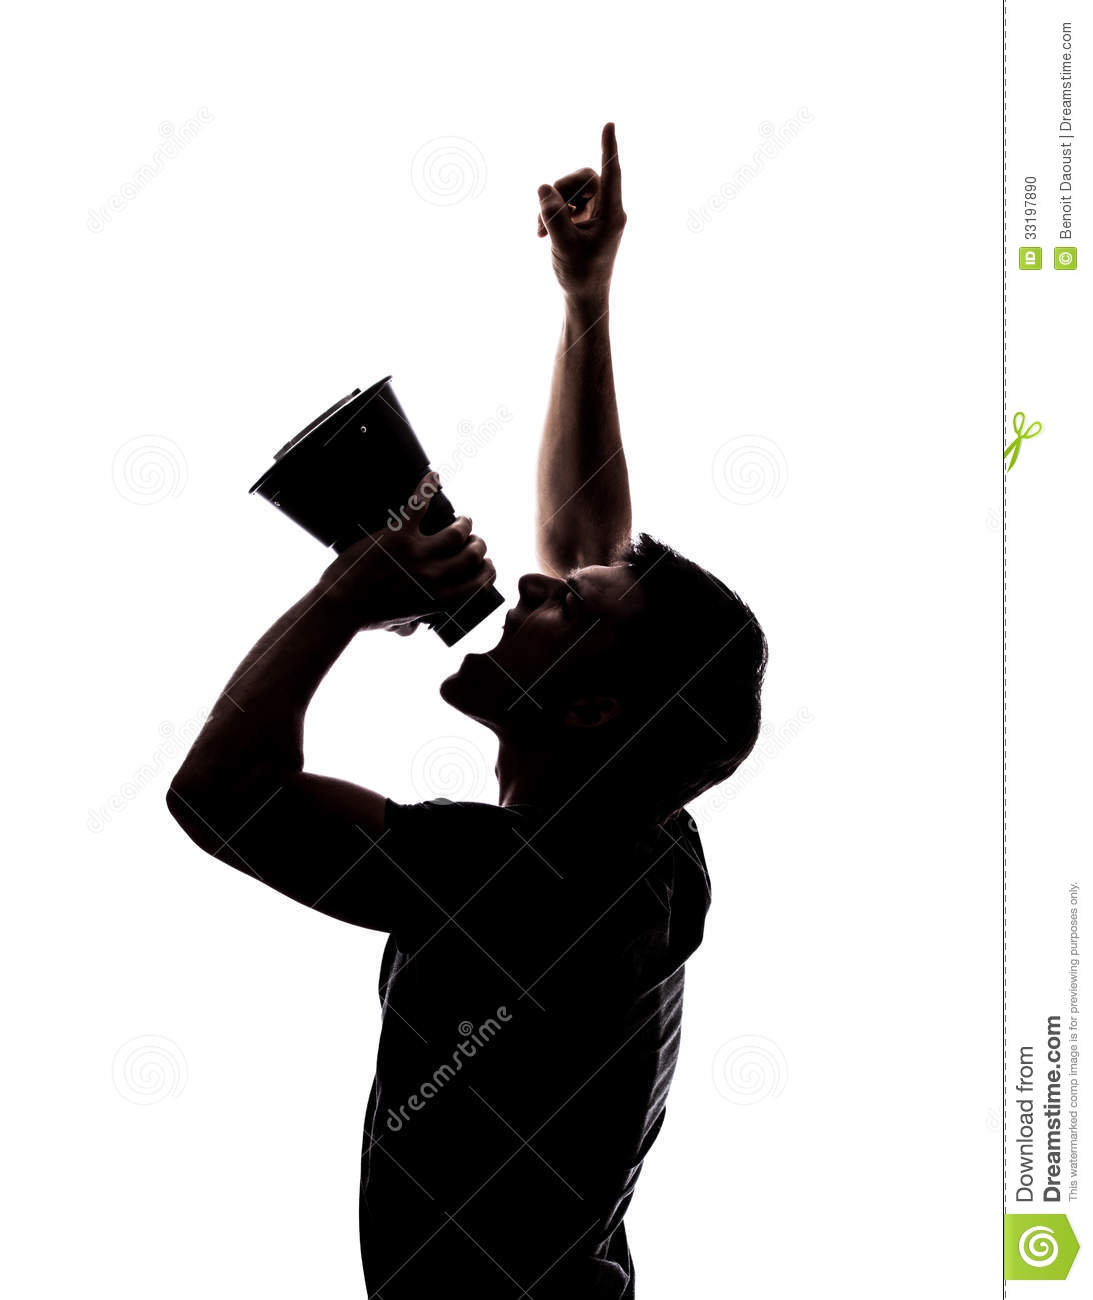 Man Yelling In A Megaphone In Silhouette Isolated Over White